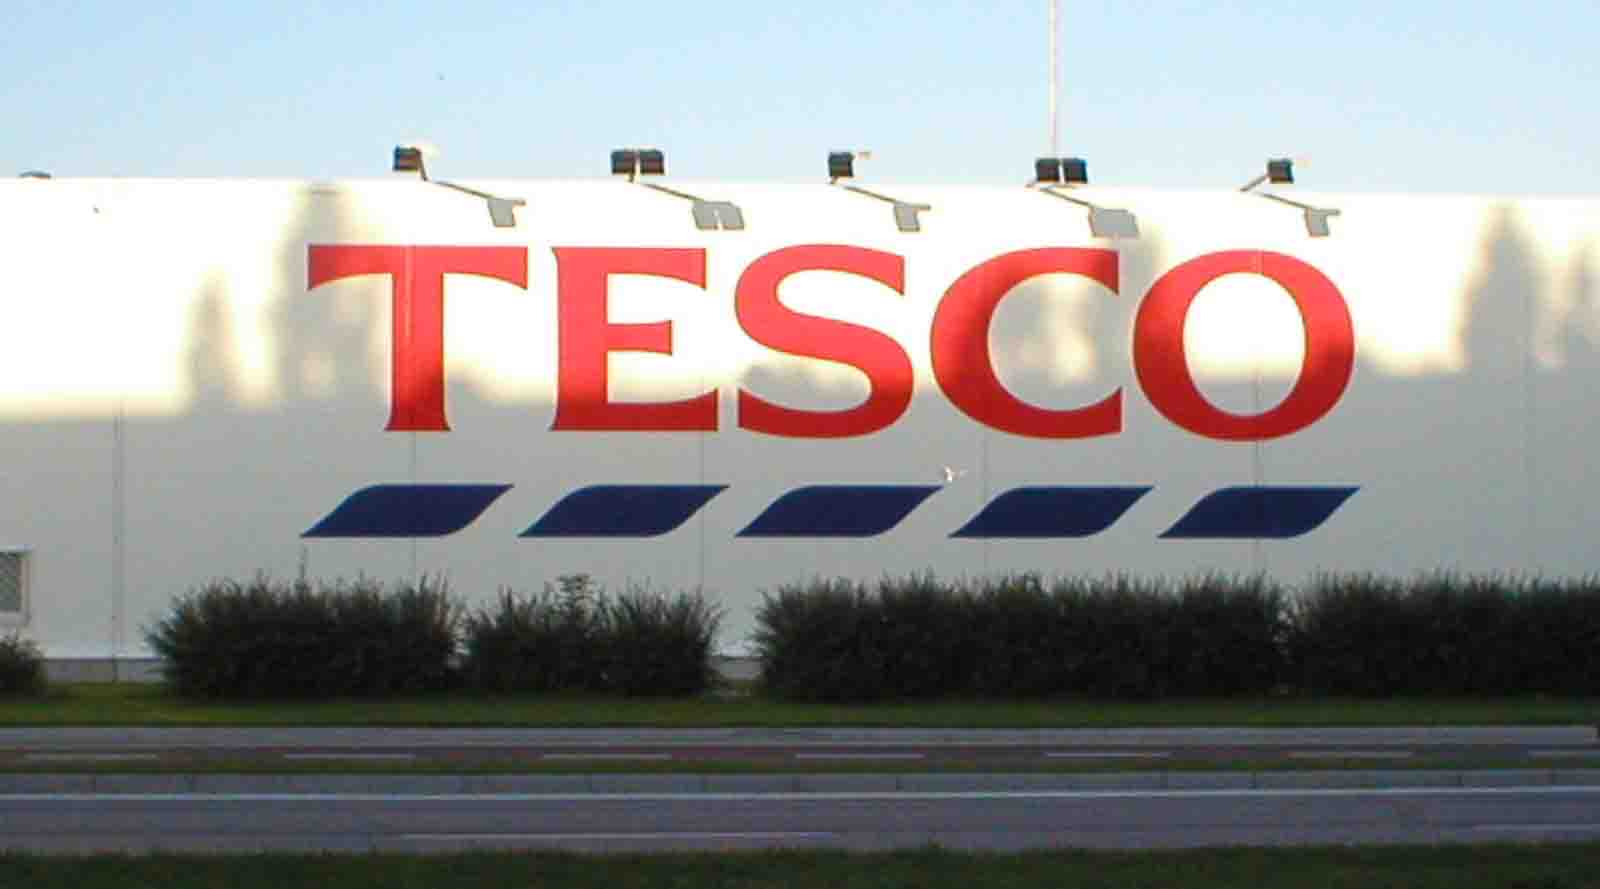 Tesco increased its share of Beer and Wine sales among multiples, discounters and convenience stores to 26.6% in the year to the 12th of June 2022.